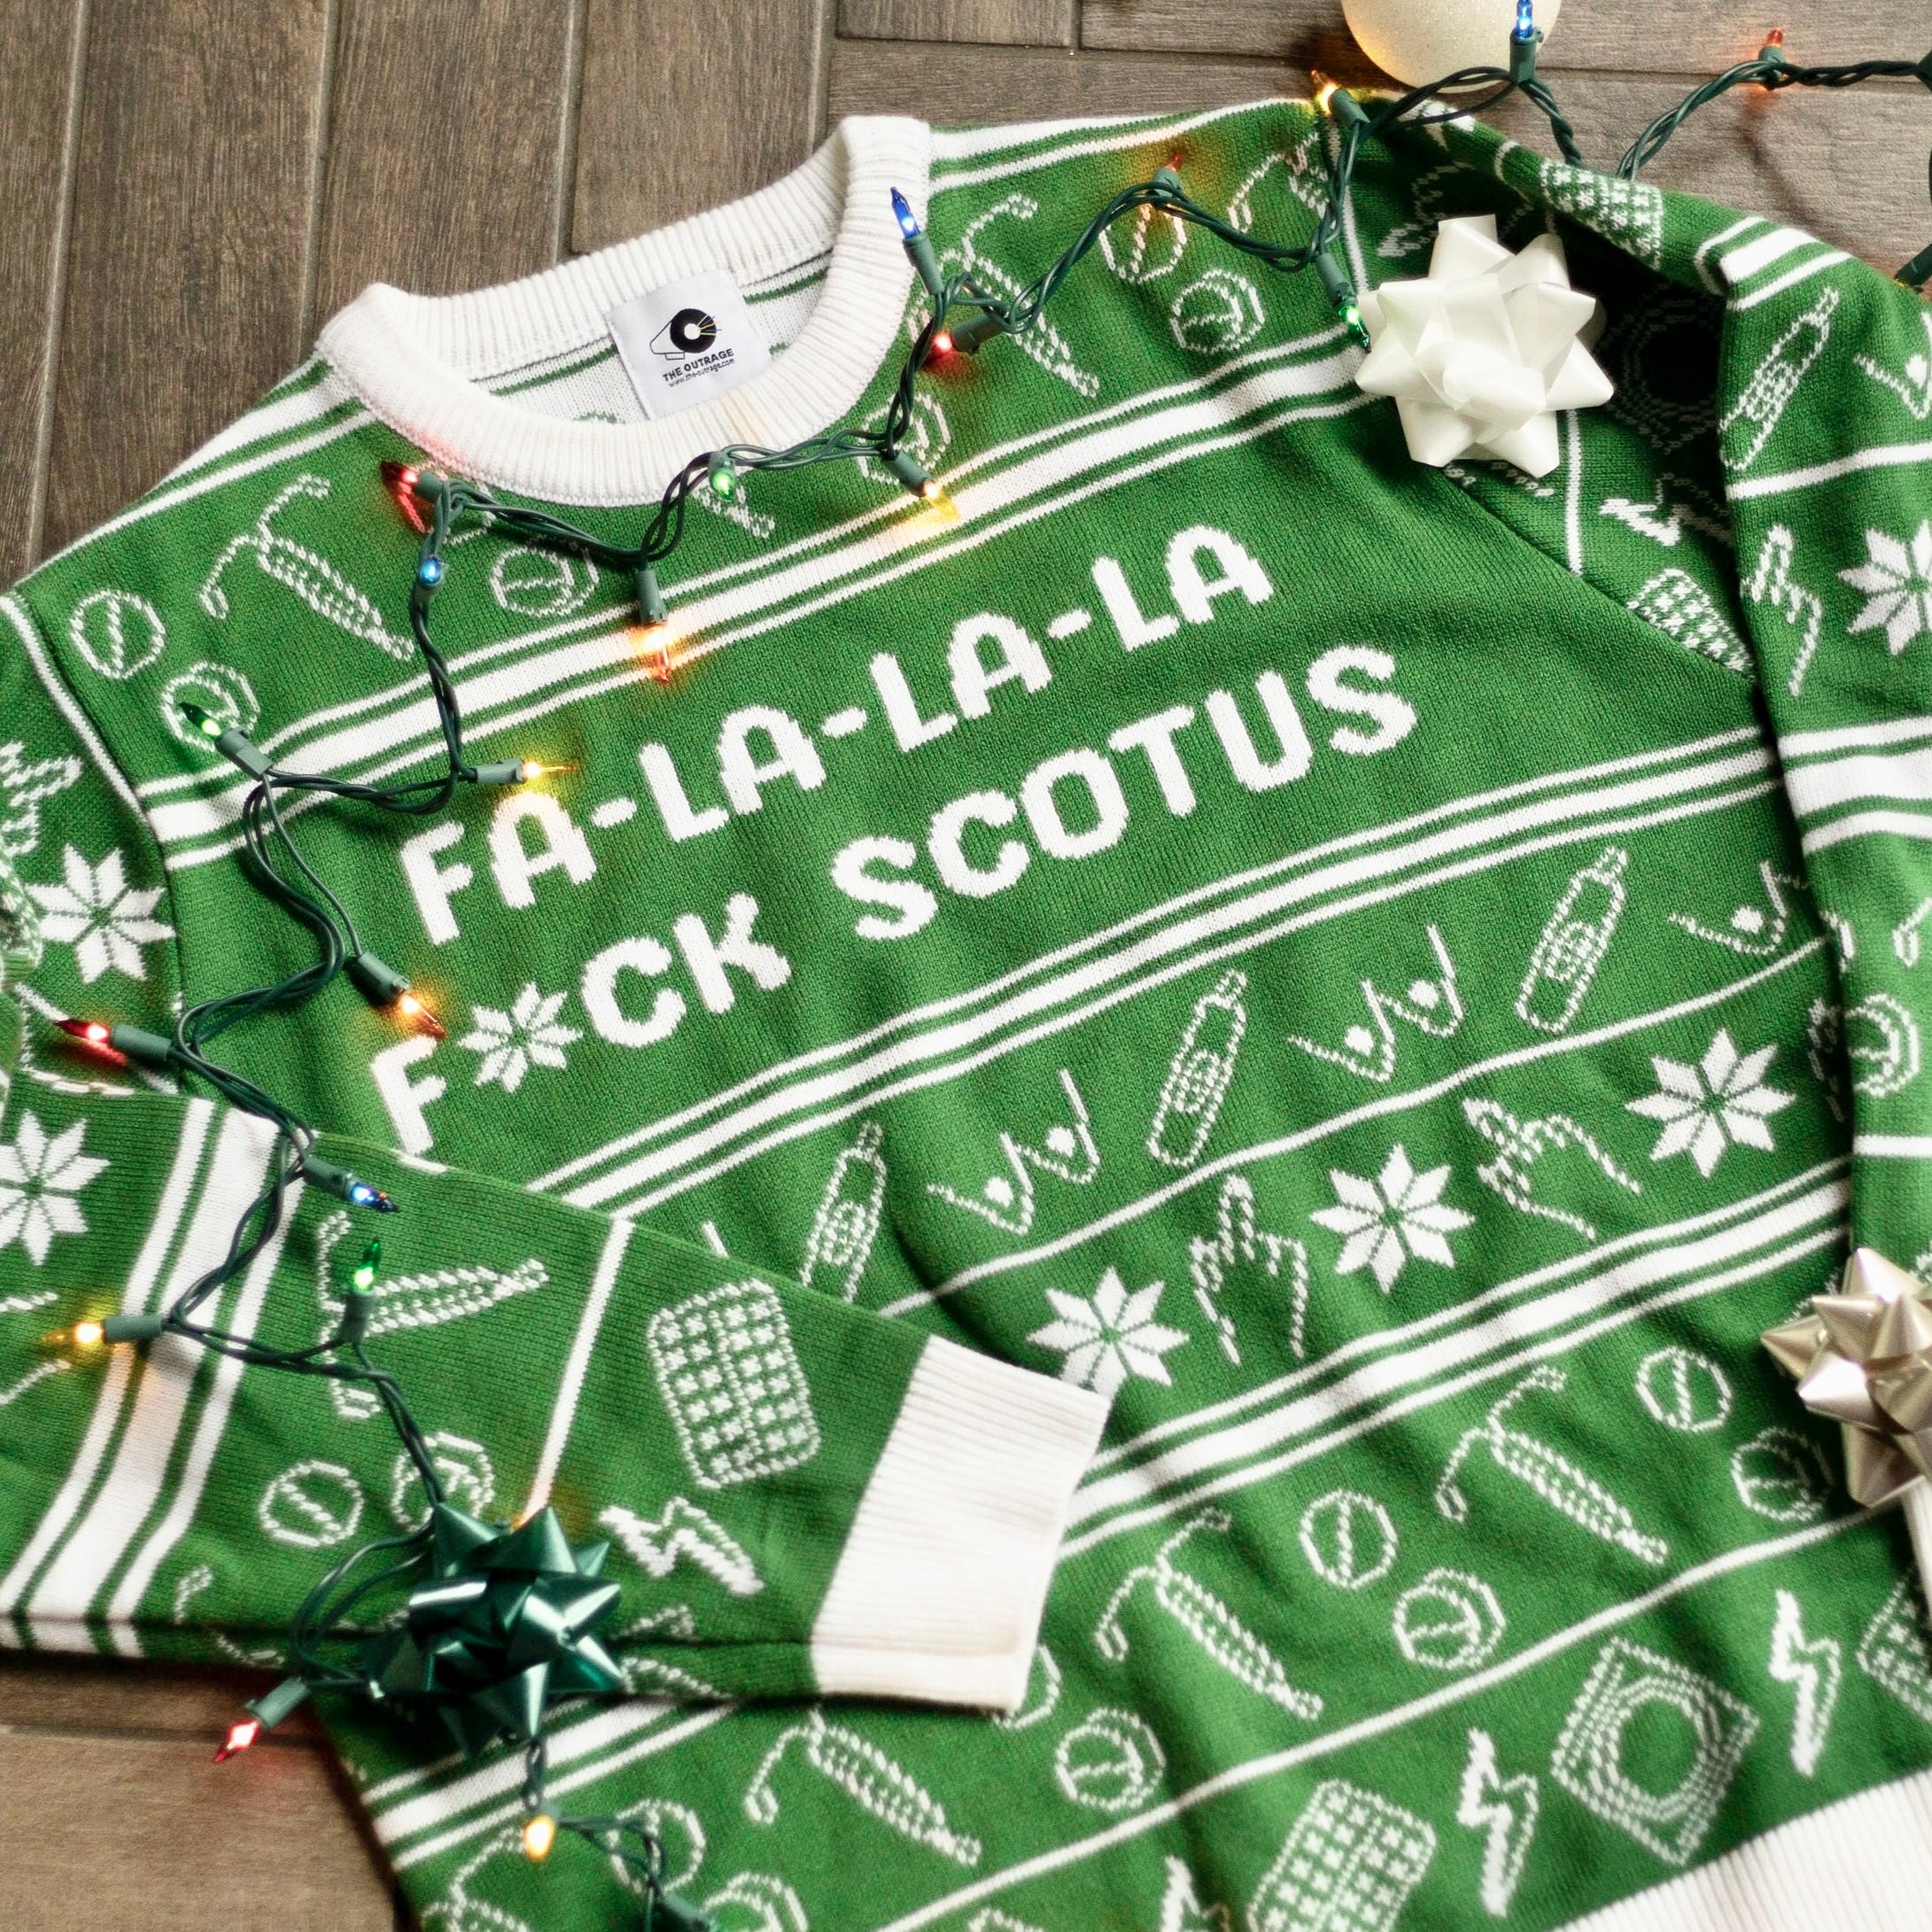 Flat lay of the Fa-La-La-La F*ck SCOTUS Holiday Sweater. There are colorful holiday lights on it and bows and ornaments around it.